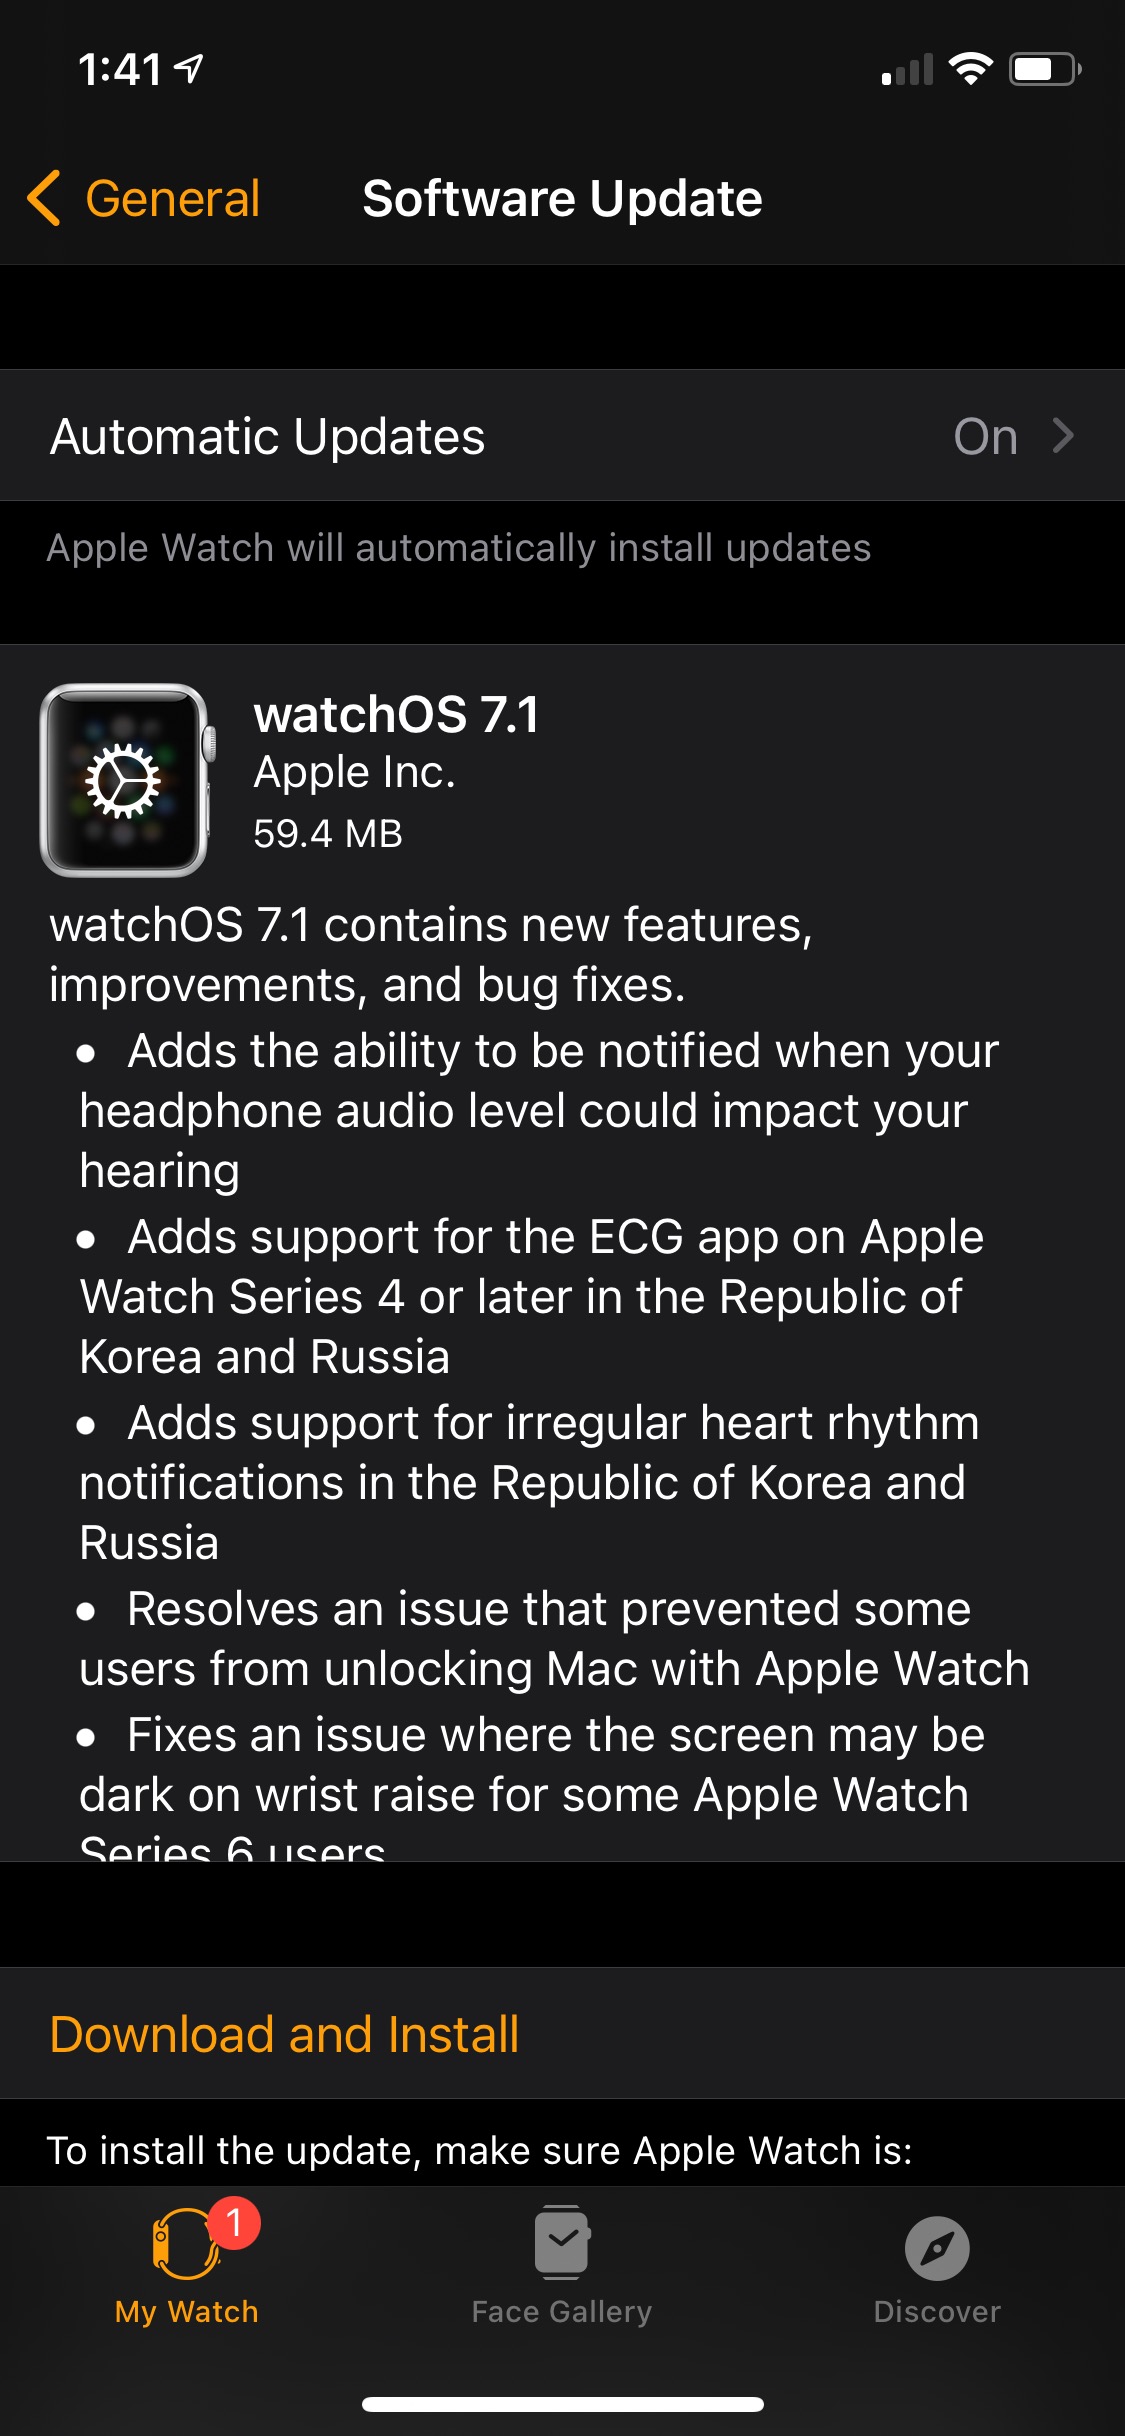 Apple Releases watchOS 7.1 for Apple Watch With Headphone Audio Level Alerts, Expanded ECG App Availability, More